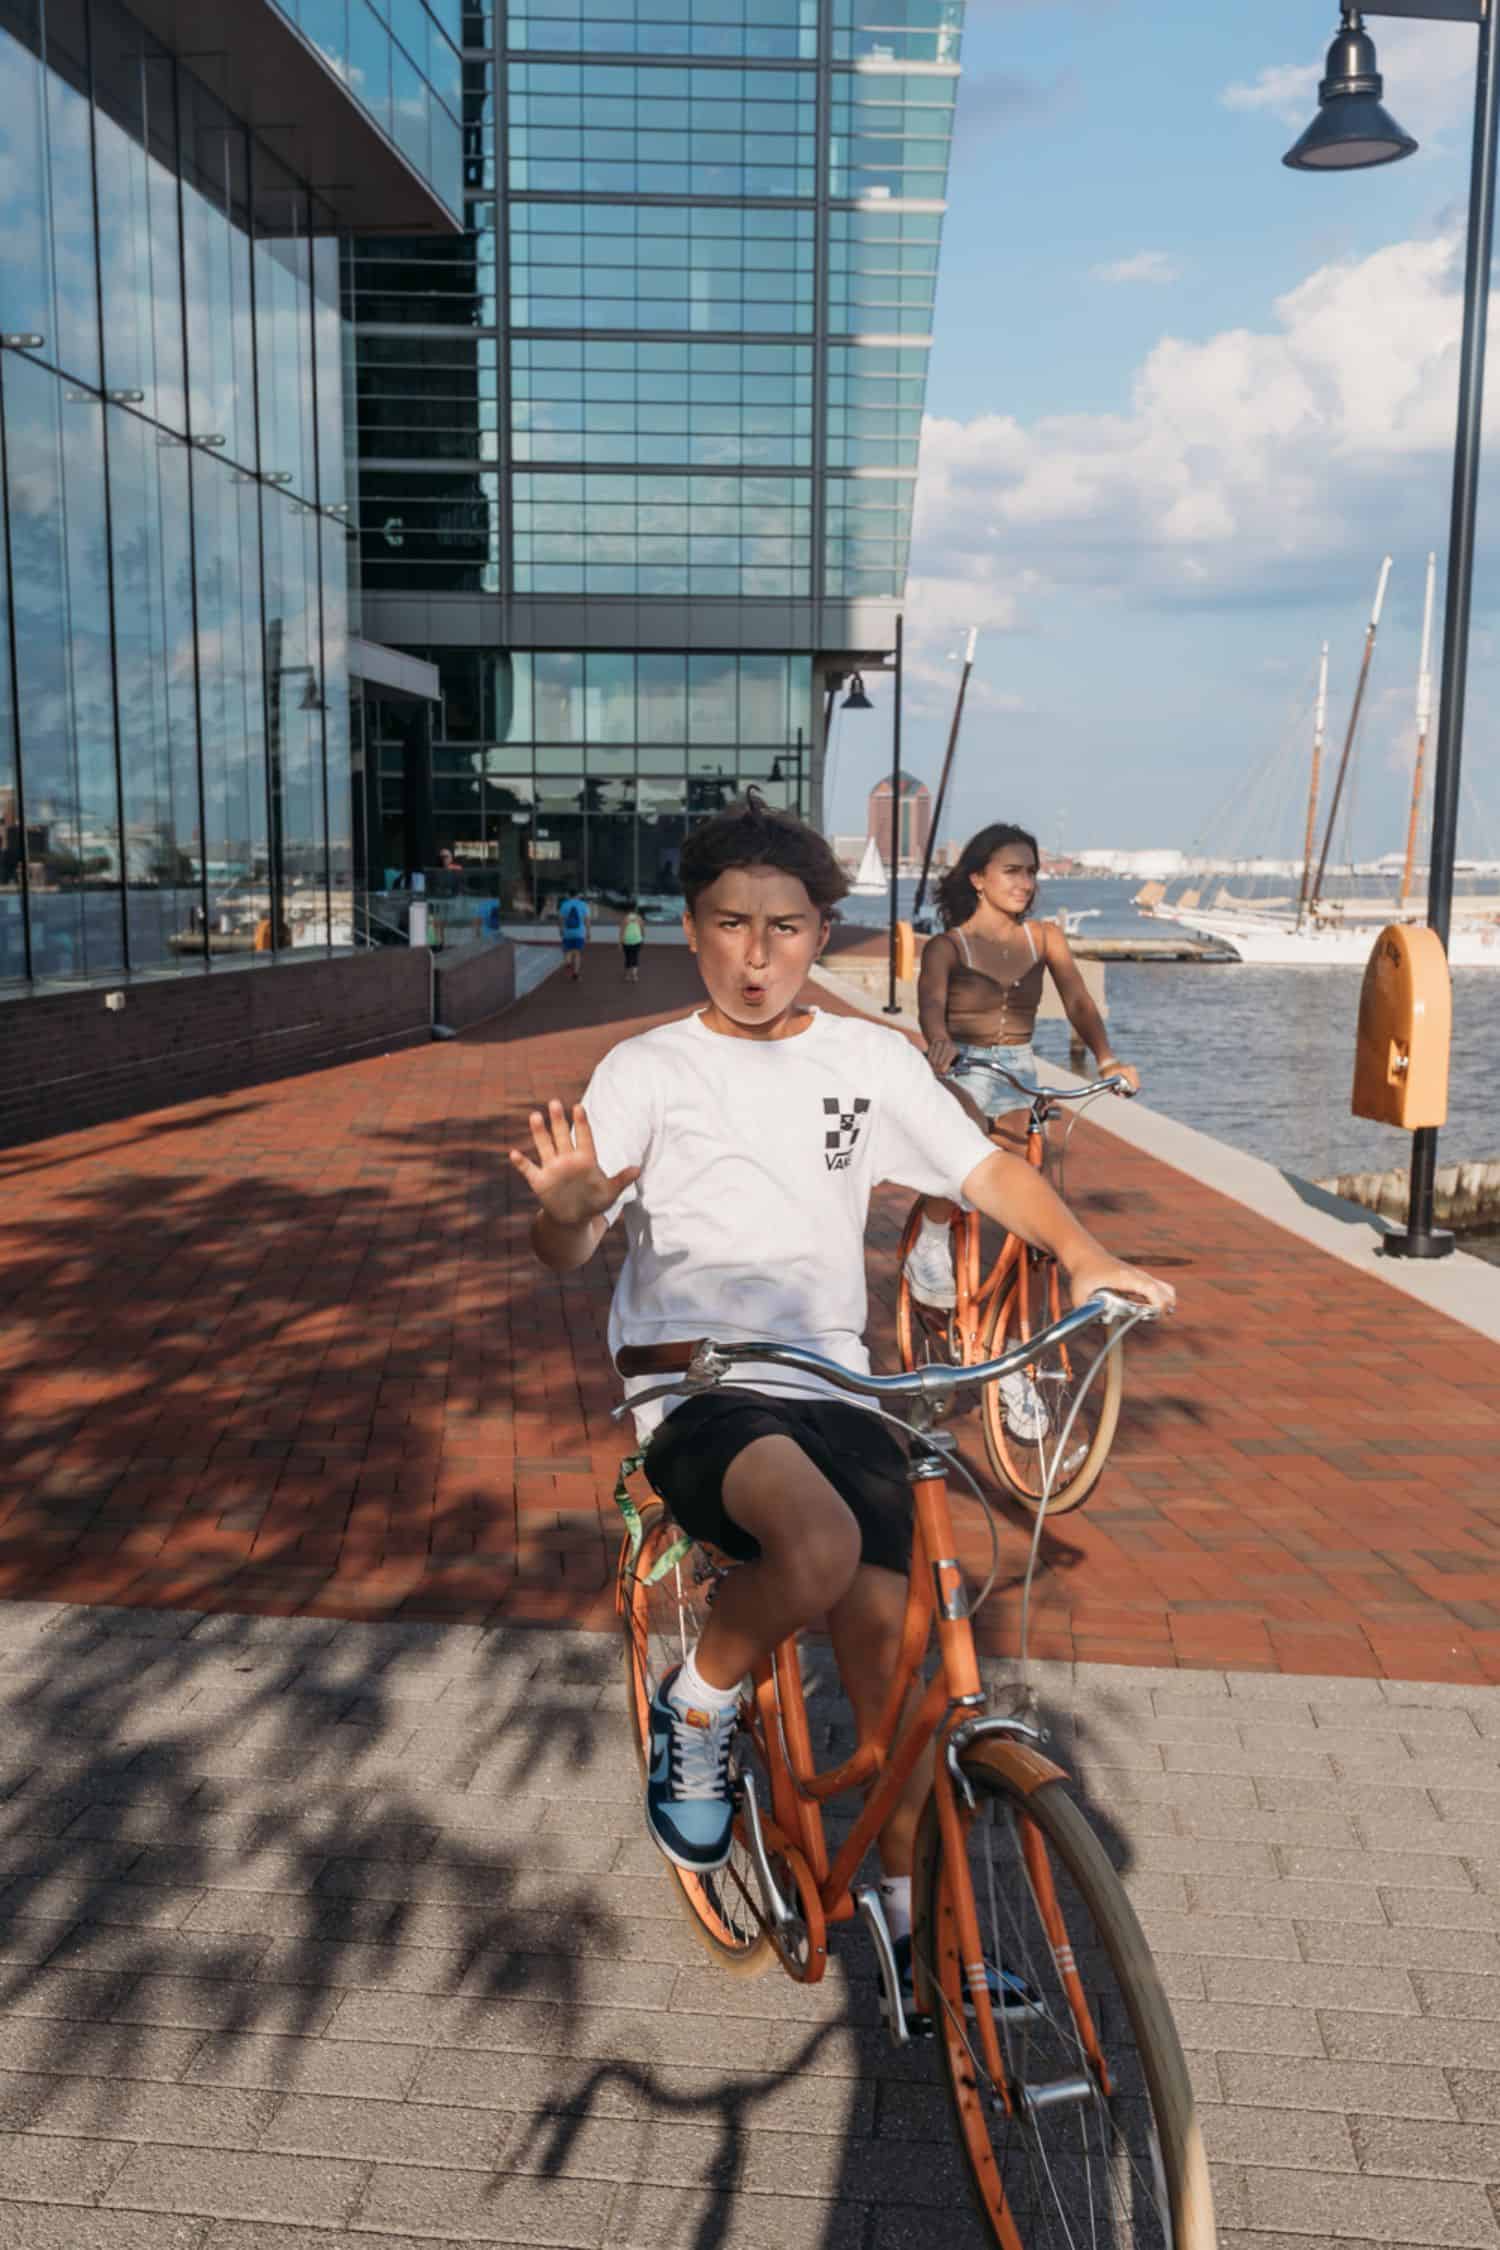 boy riding on a bike with a girl in the background